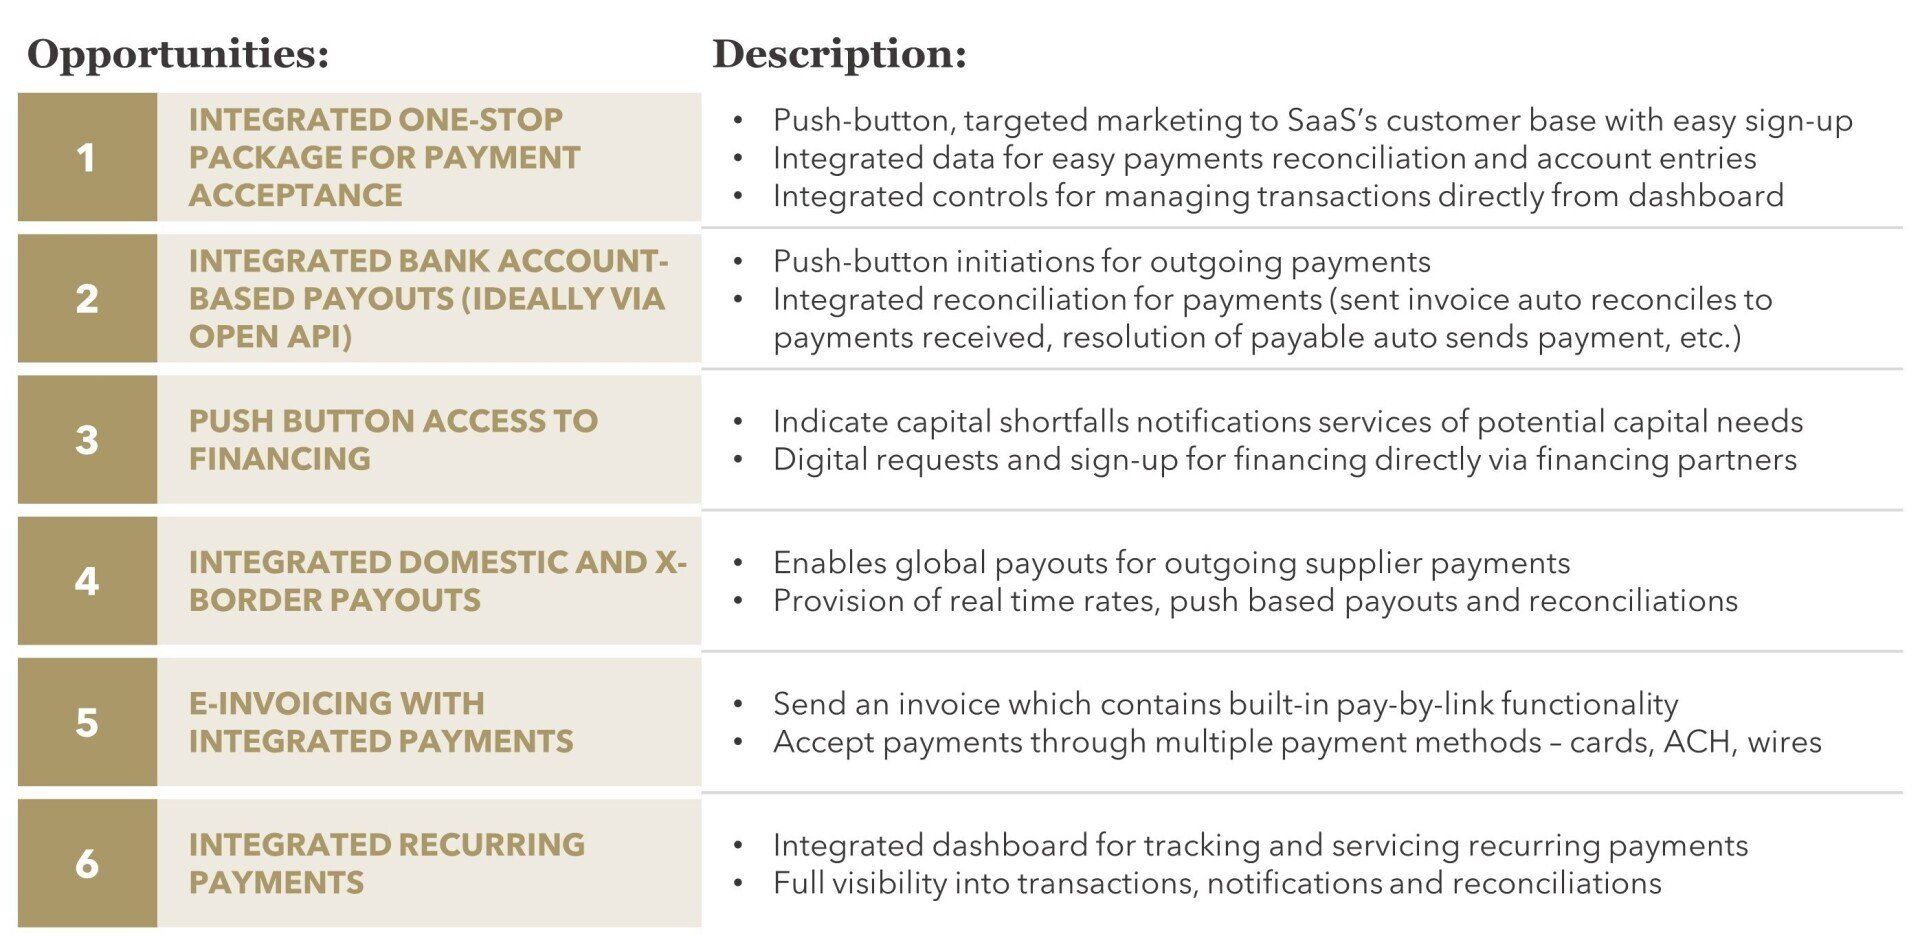 FIGURE 6: Integrated Payments Opportunities for SaaS Based Accounting / ERPs 
  